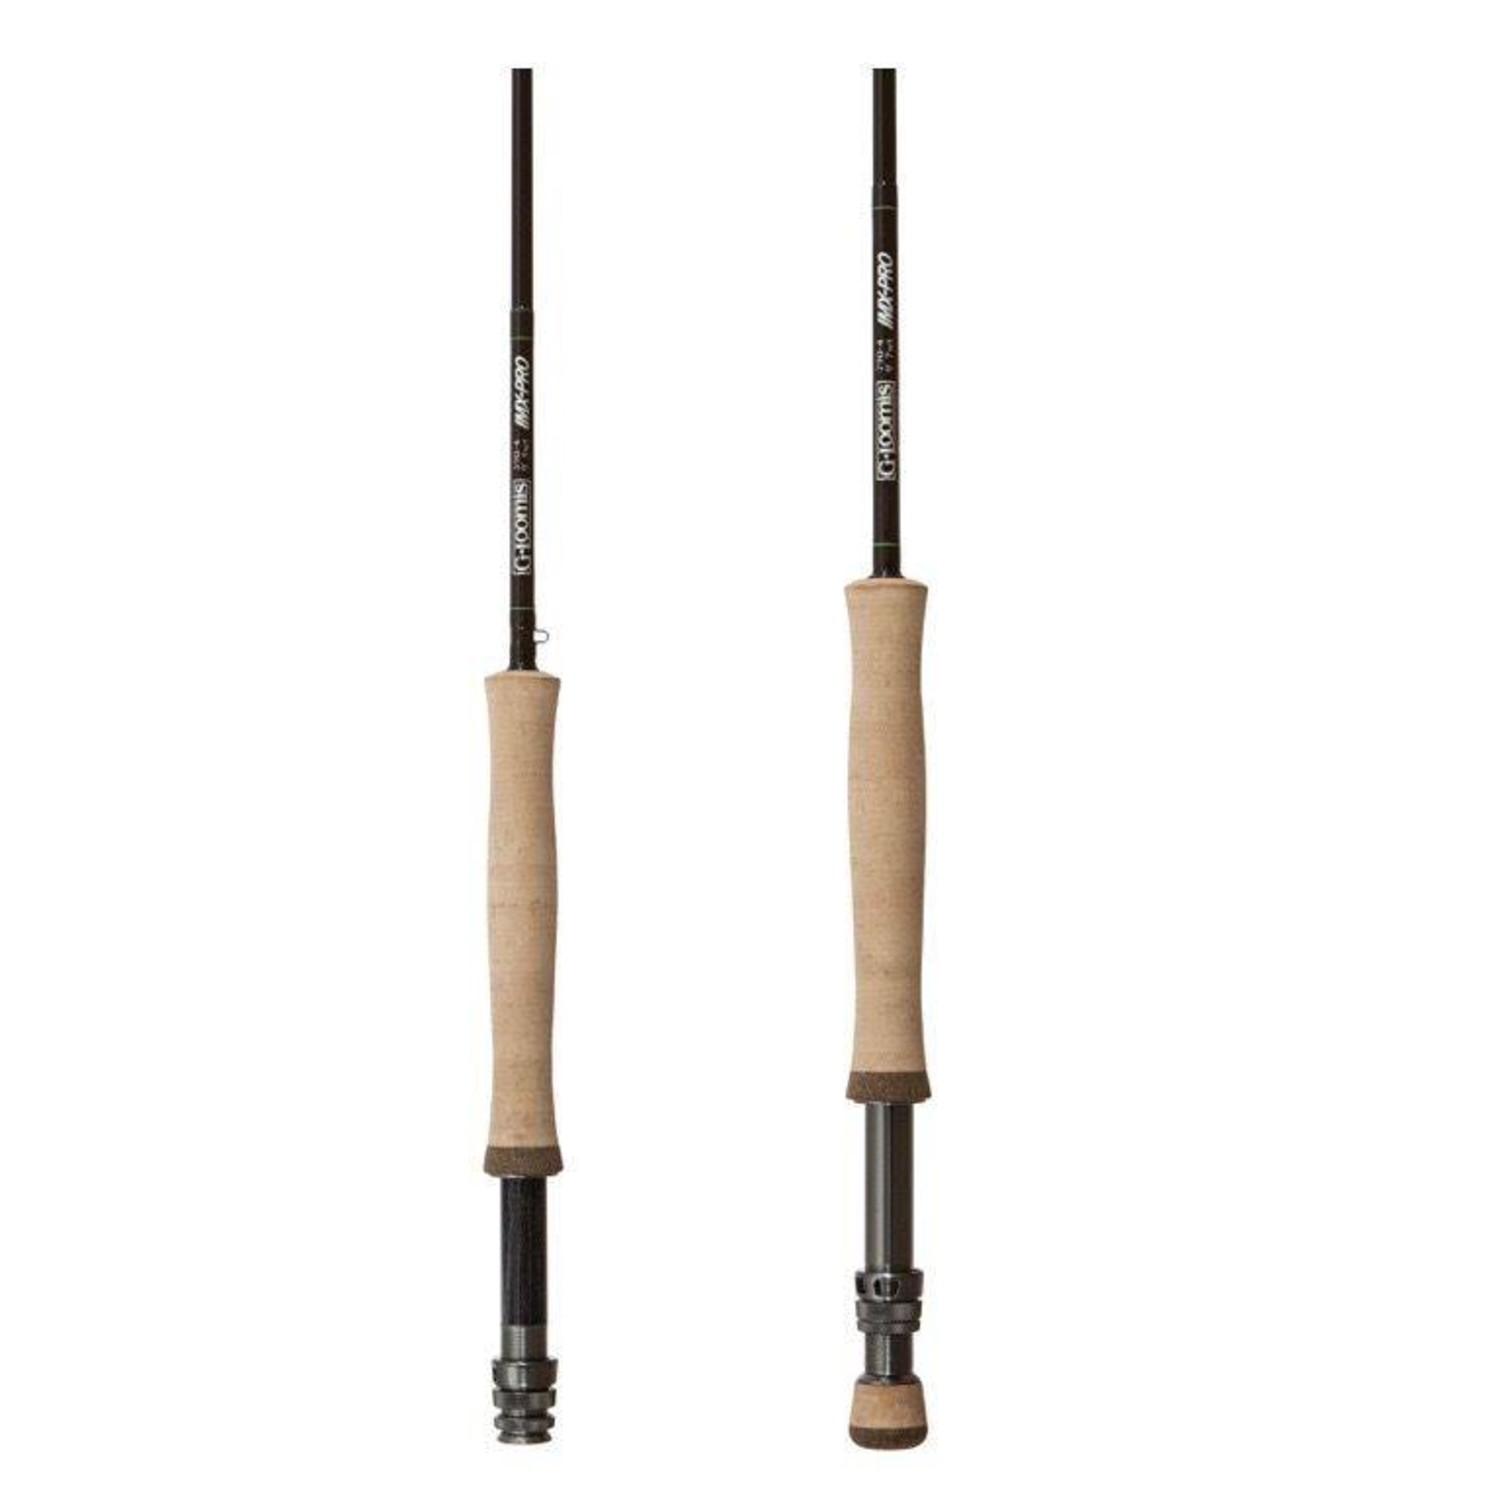 G. Loomis IMX Pro Fly Rods - Royal Treatment Fly Fishing